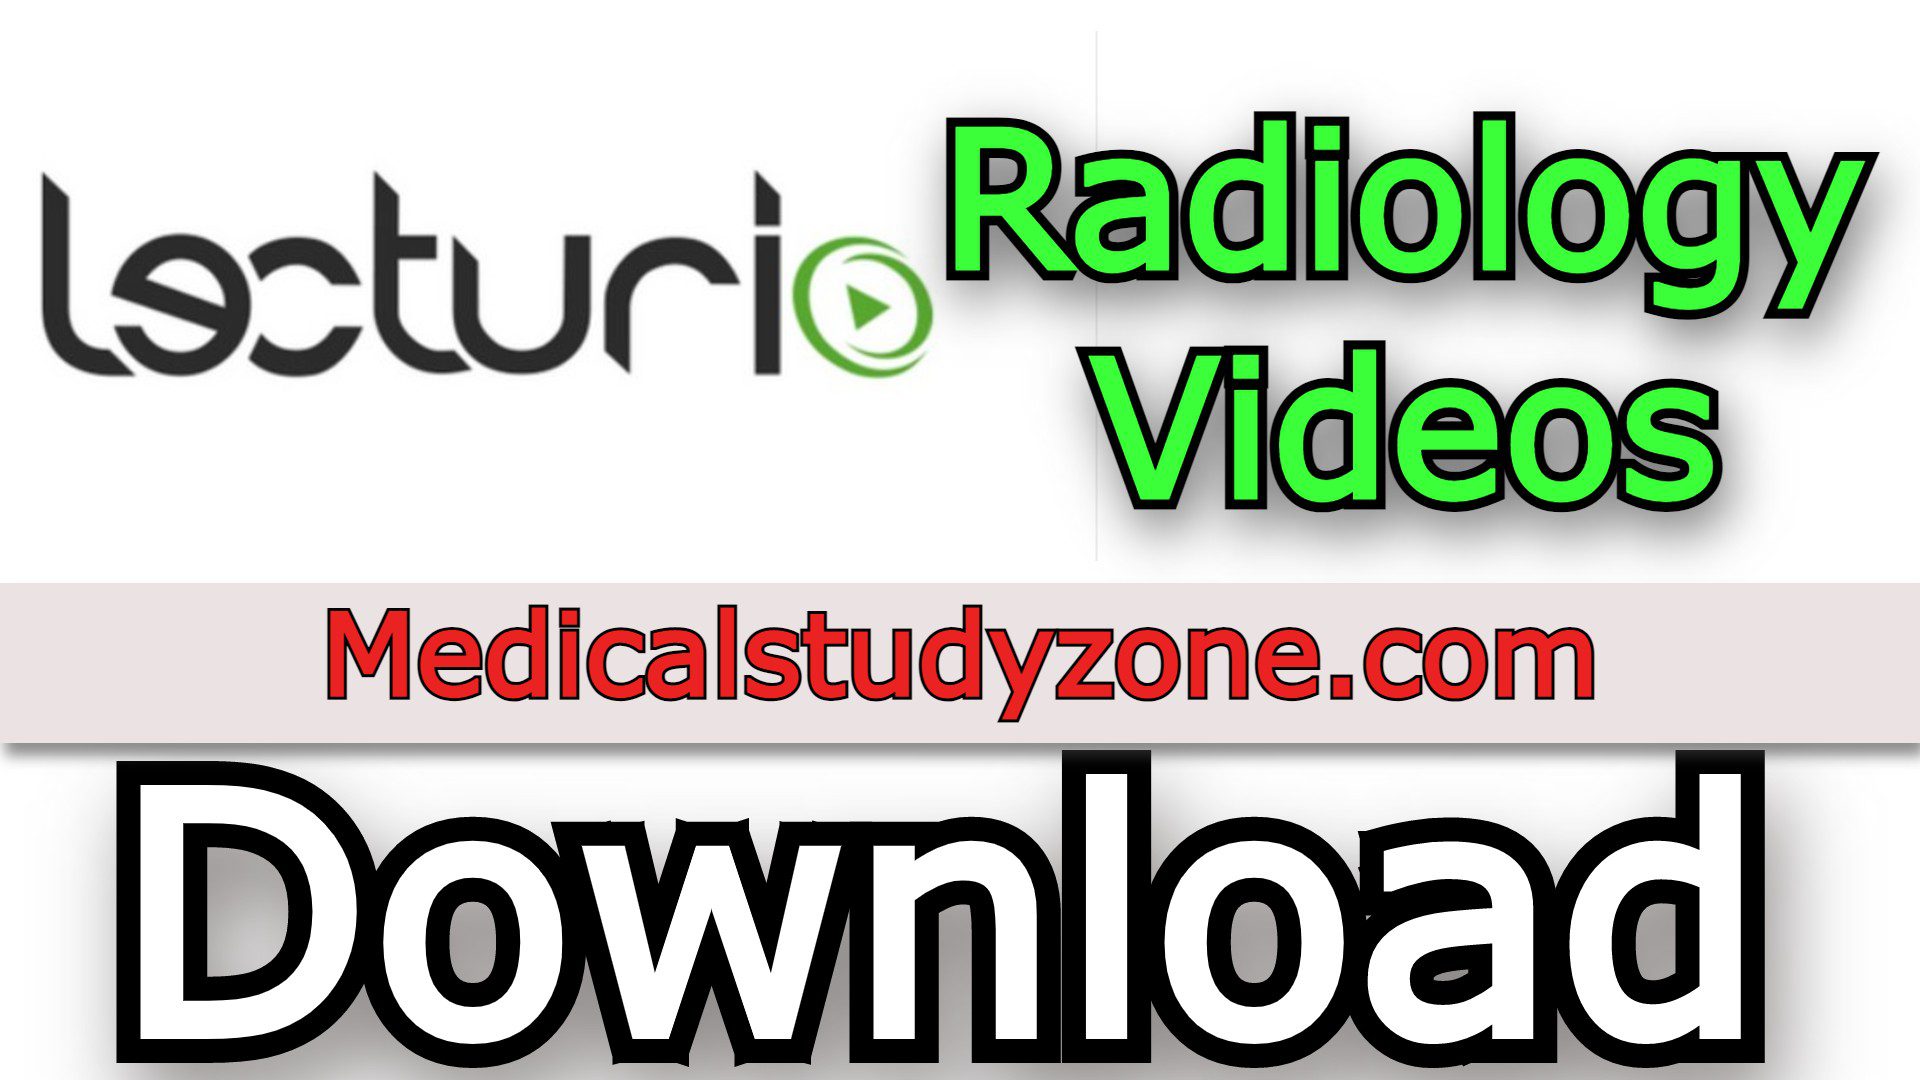 Lecturio Radiology Videos 2021 Free Download